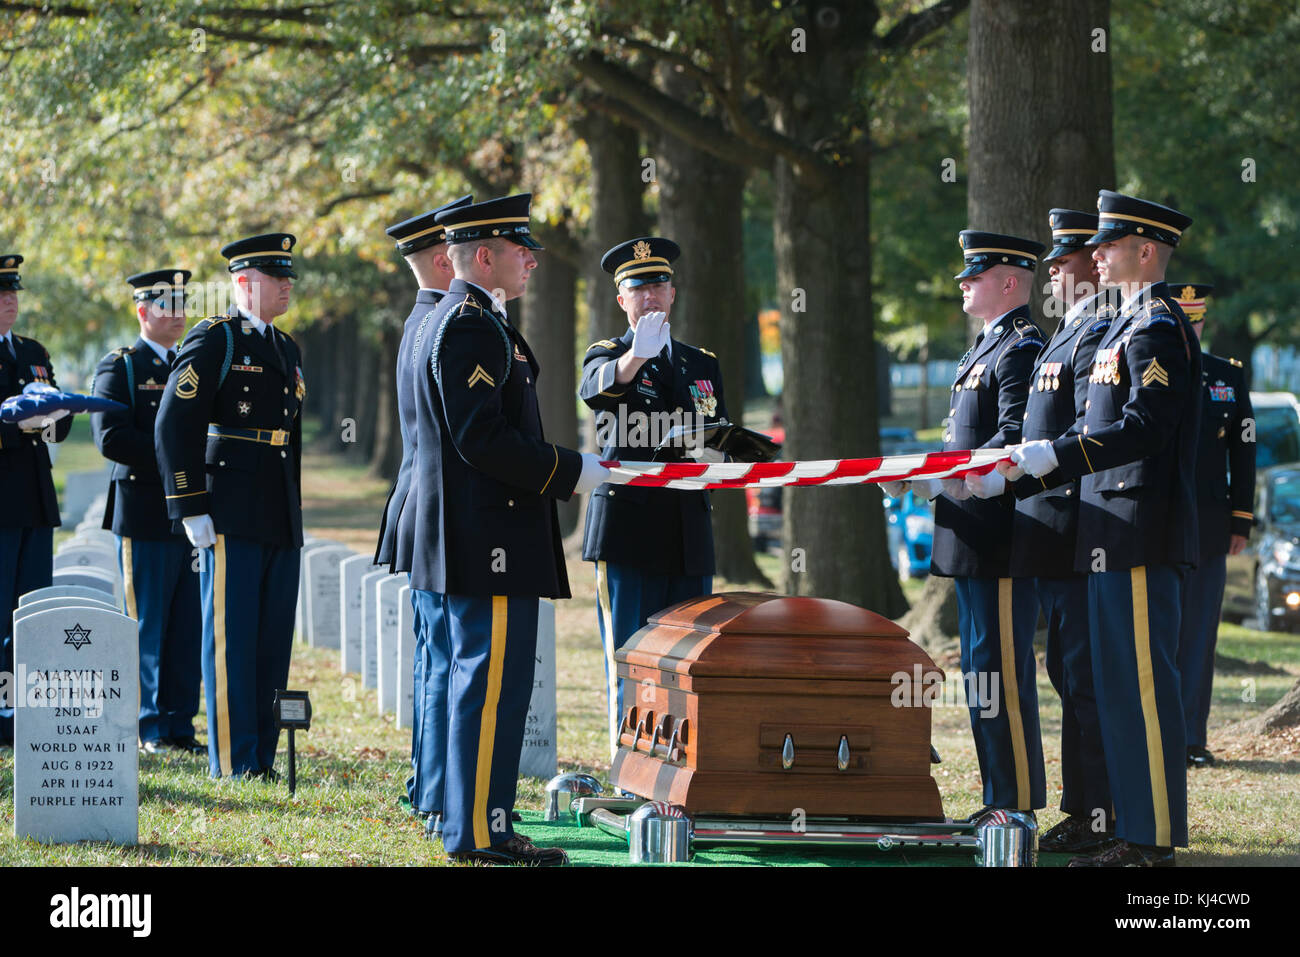 Graveside Service for U.S. Army Staff Sgt. Alexander Dalida in Section 60 of Arlington National Cemetery (37953220311) Stock Photo